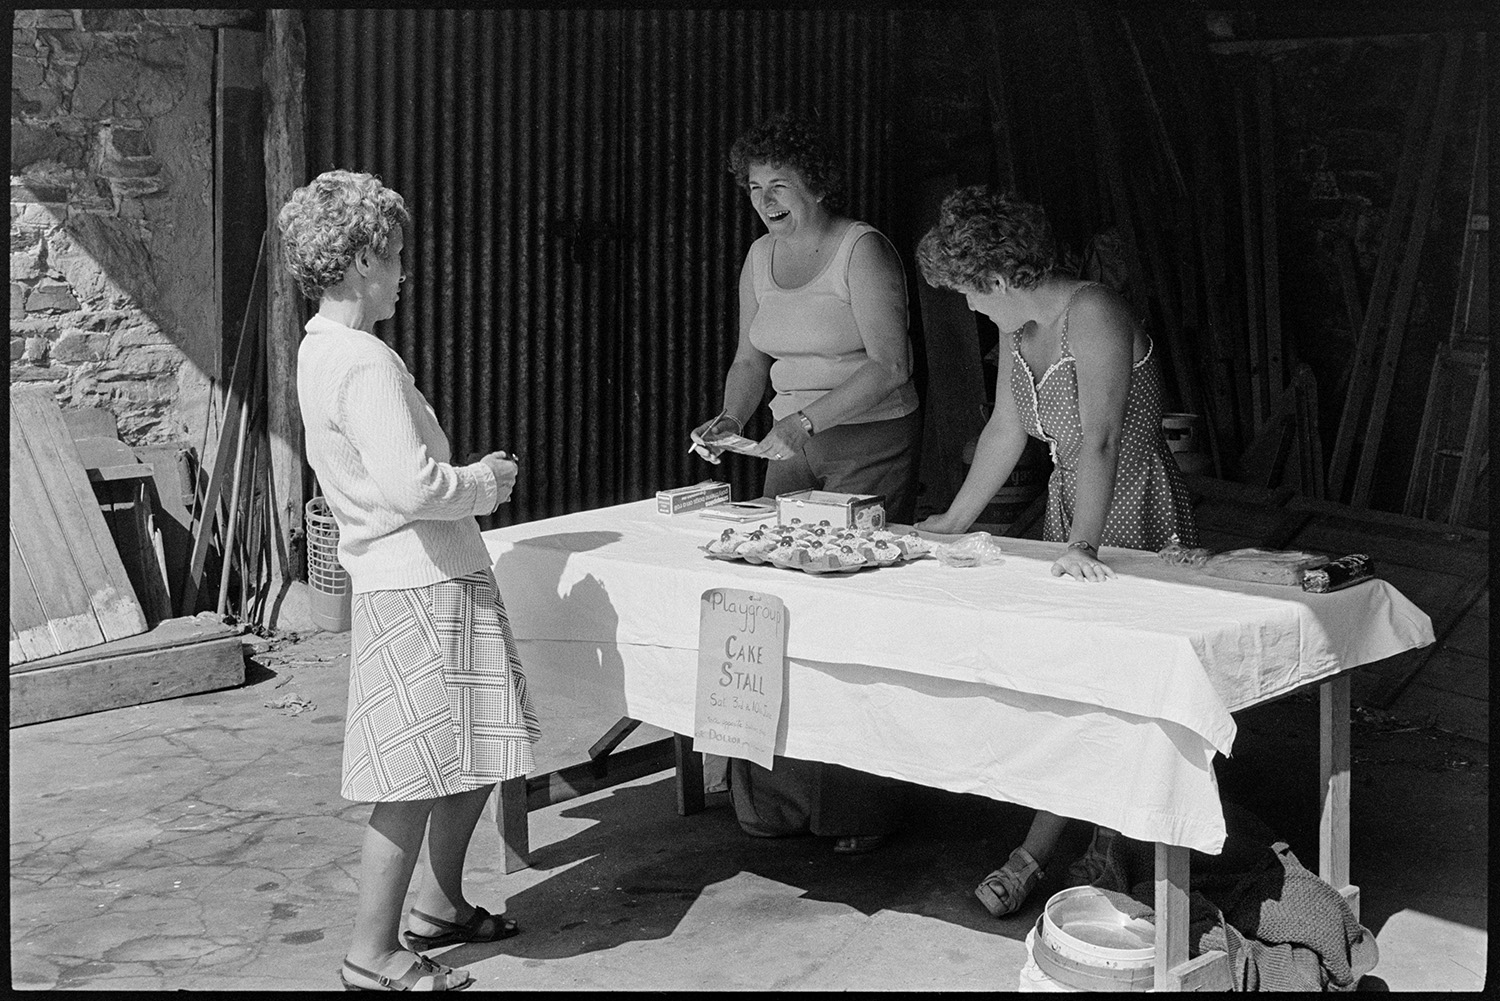 Women at cake stall in aid of children's playgroup. 
[A woman buying cakes from Pam Stiles (on the left) and another women running a cake stall to raise money for the children's playgroup in Dolton. They are talking and laughing.]